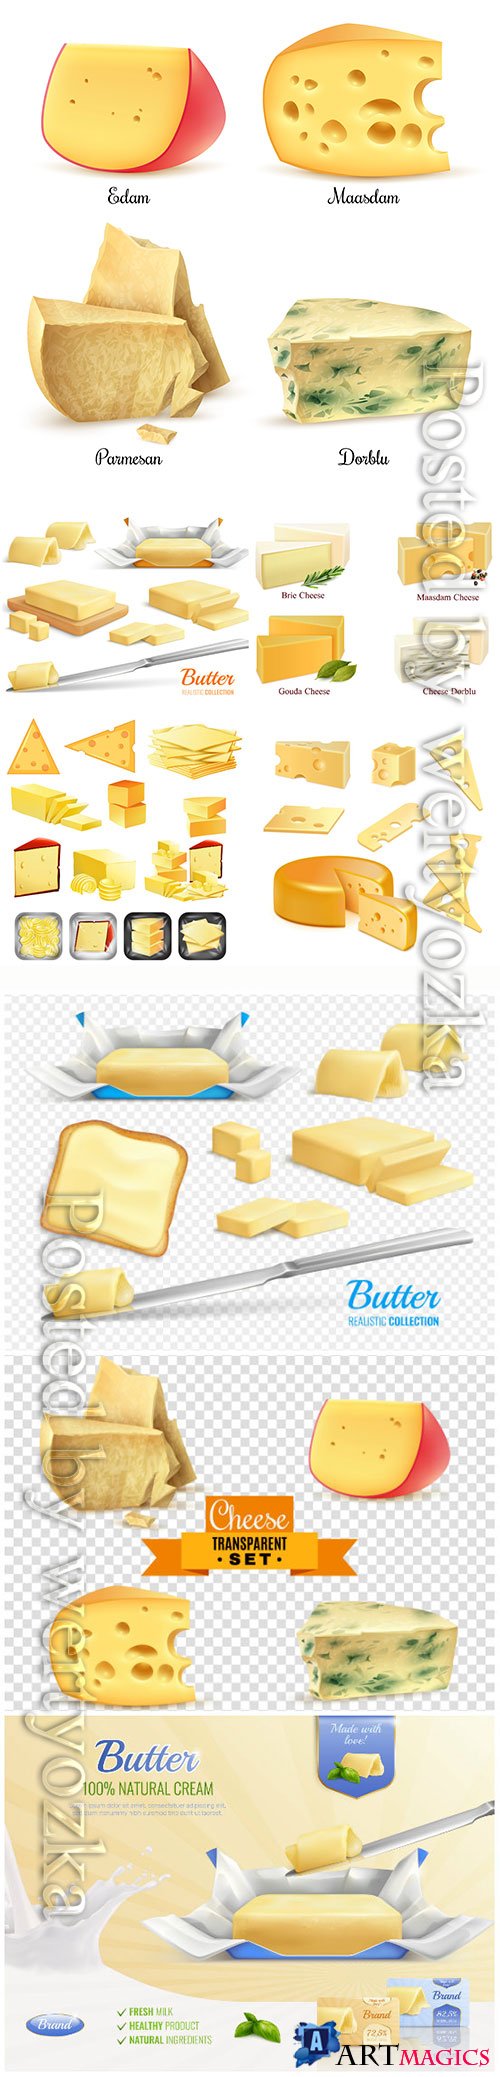 Dairy, products, cheese, butter, vector